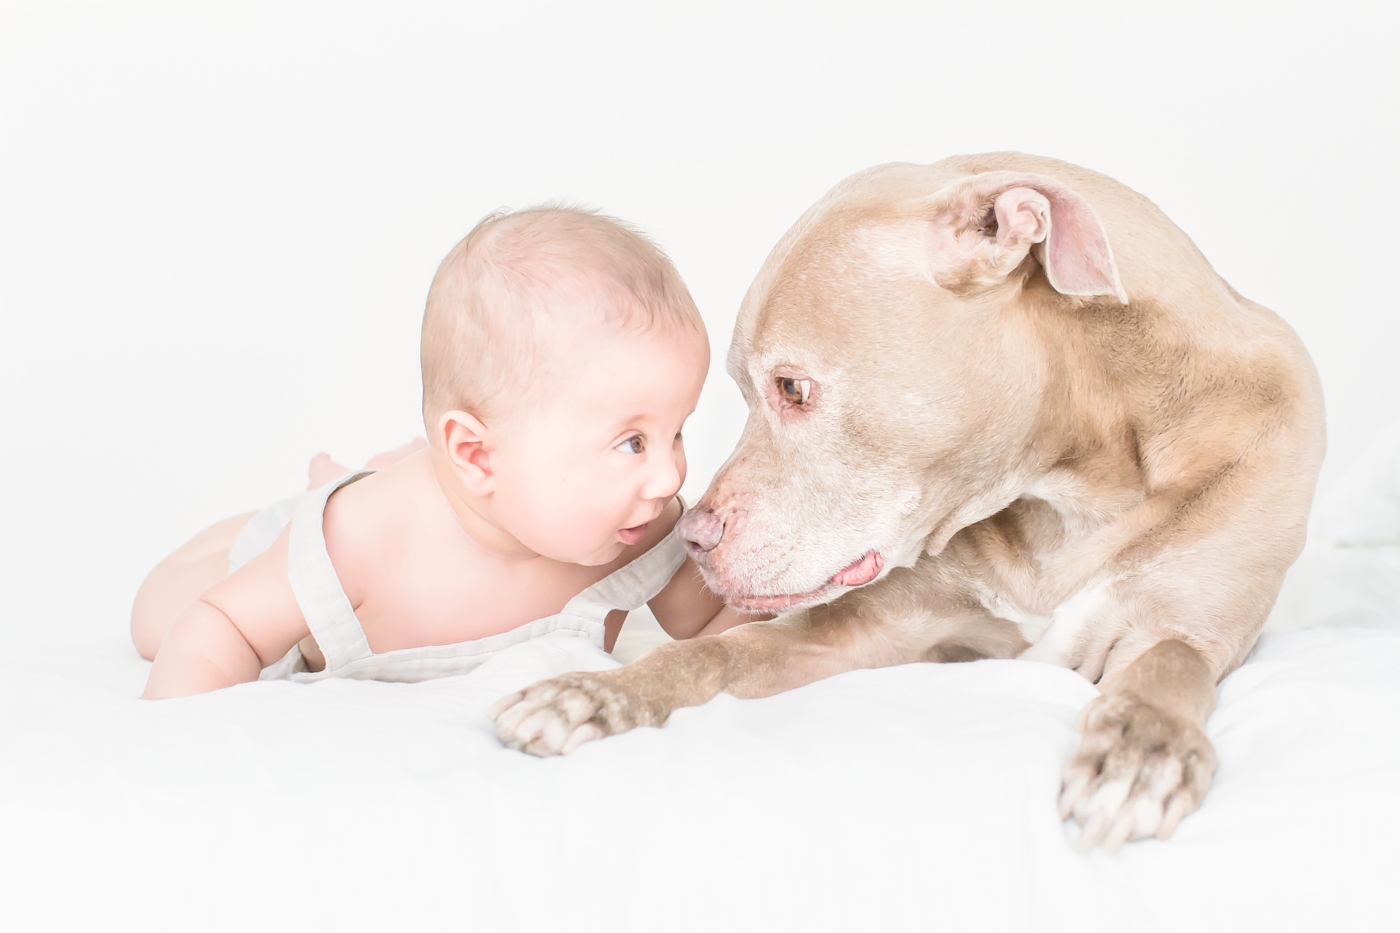 Baby and dog looking at each other in studio session. Photo by Austin family photographer, Sana Ahmed Photography.